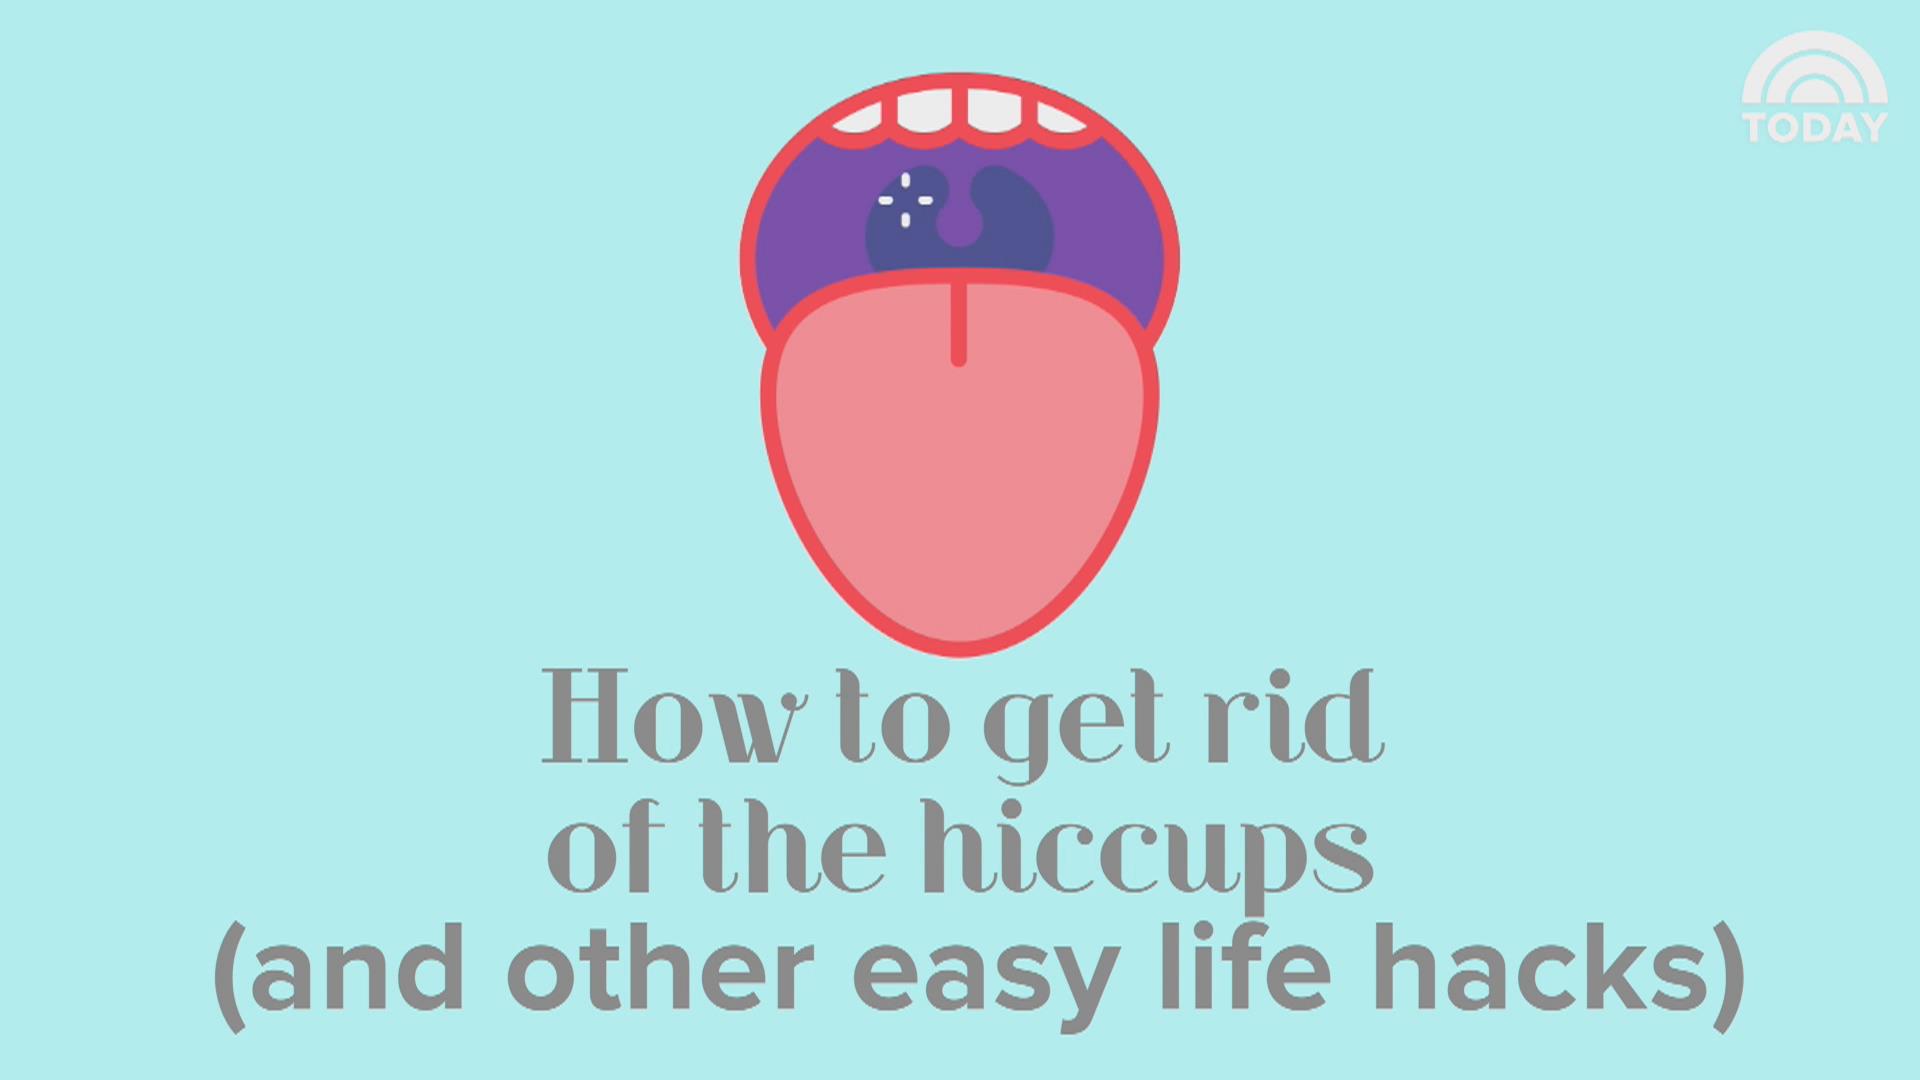 plade Adskille periskop How to get rid of hiccups? What causes hiccups? Here's what science says